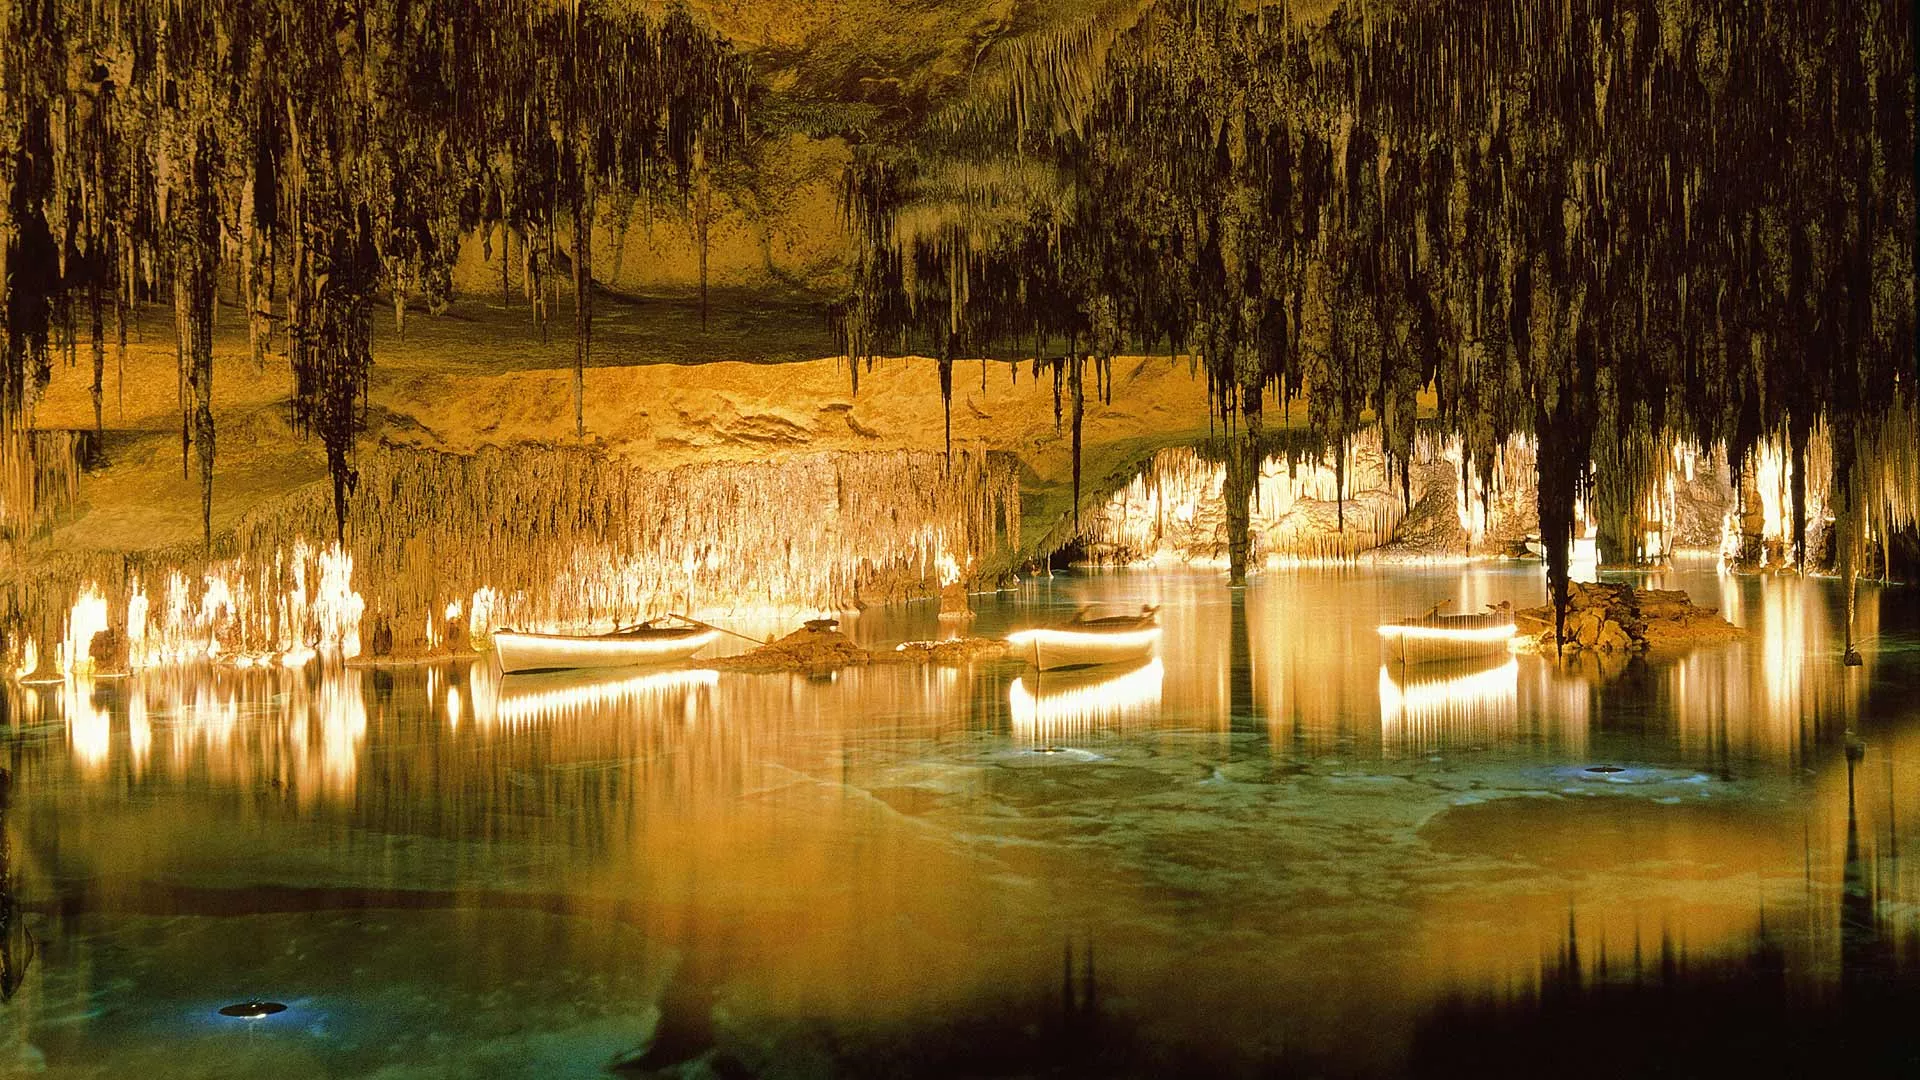 Cuevas del Drach in Spain, Europe | Caves & Underground Places - Rated 6.2